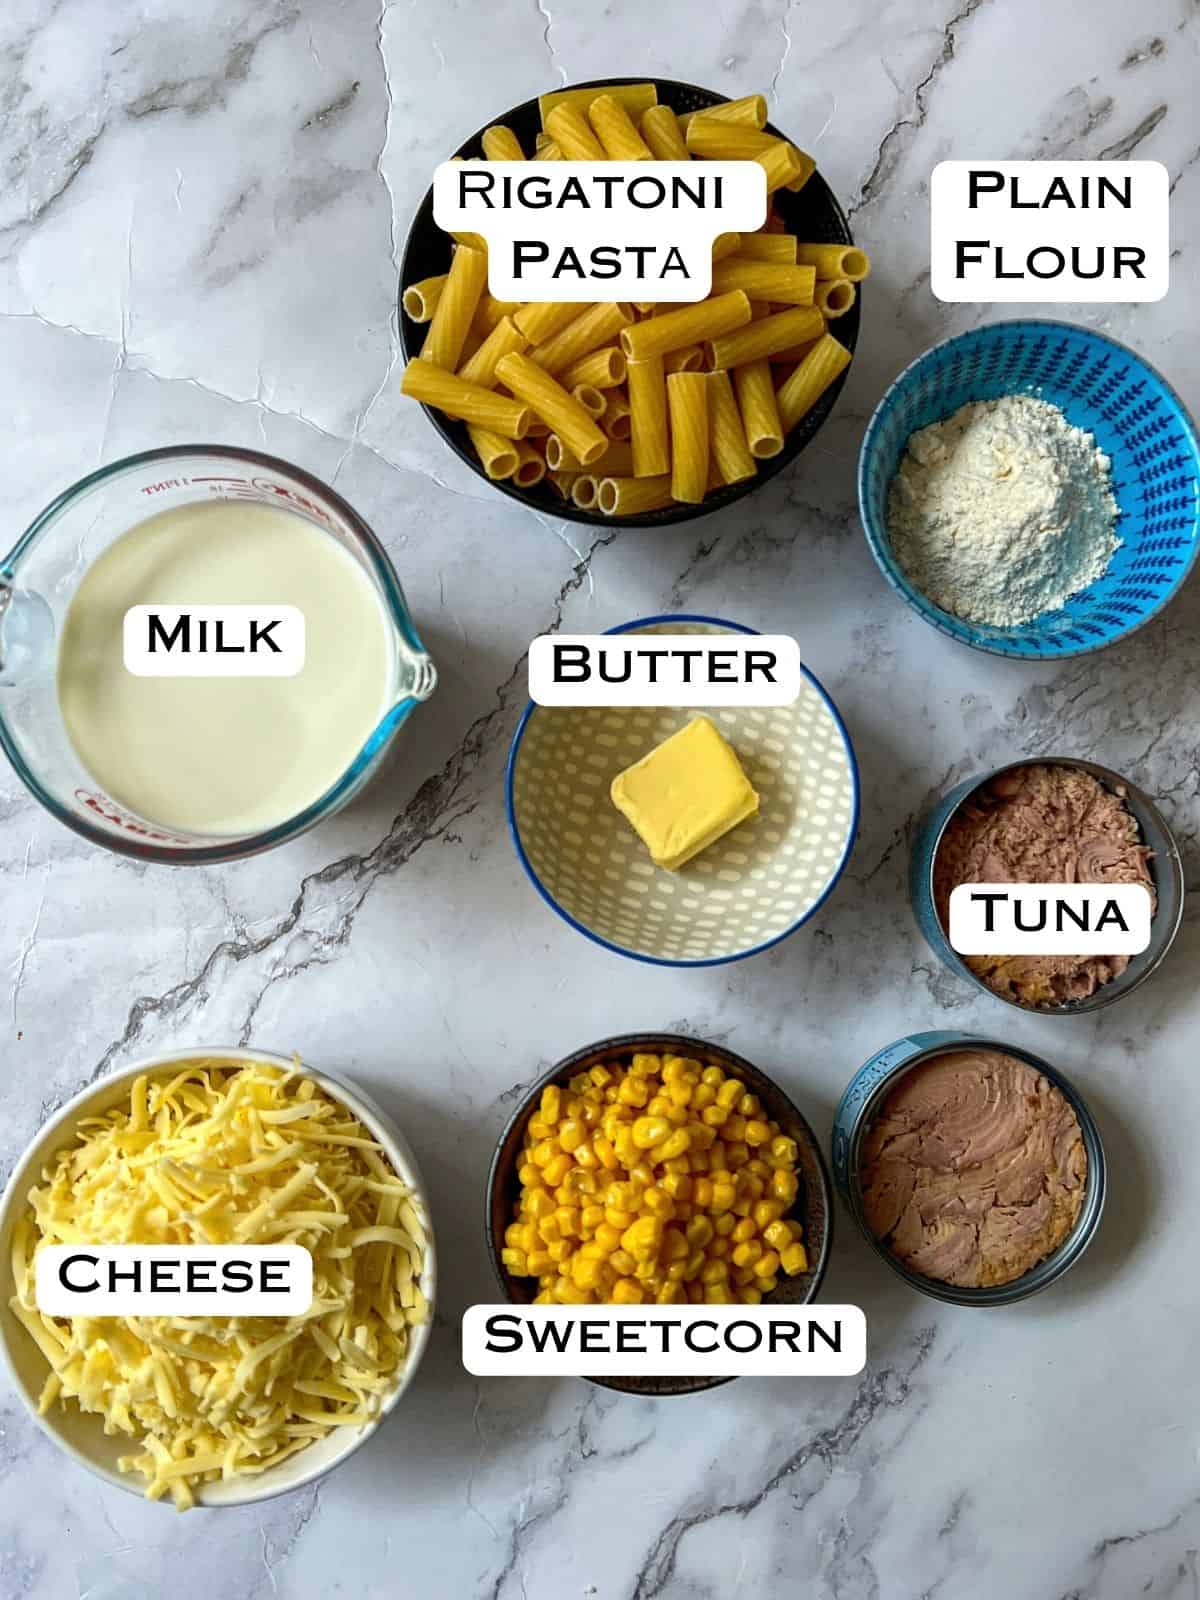 Ingredients laid out for tuna and sweetcorn pasta bake.